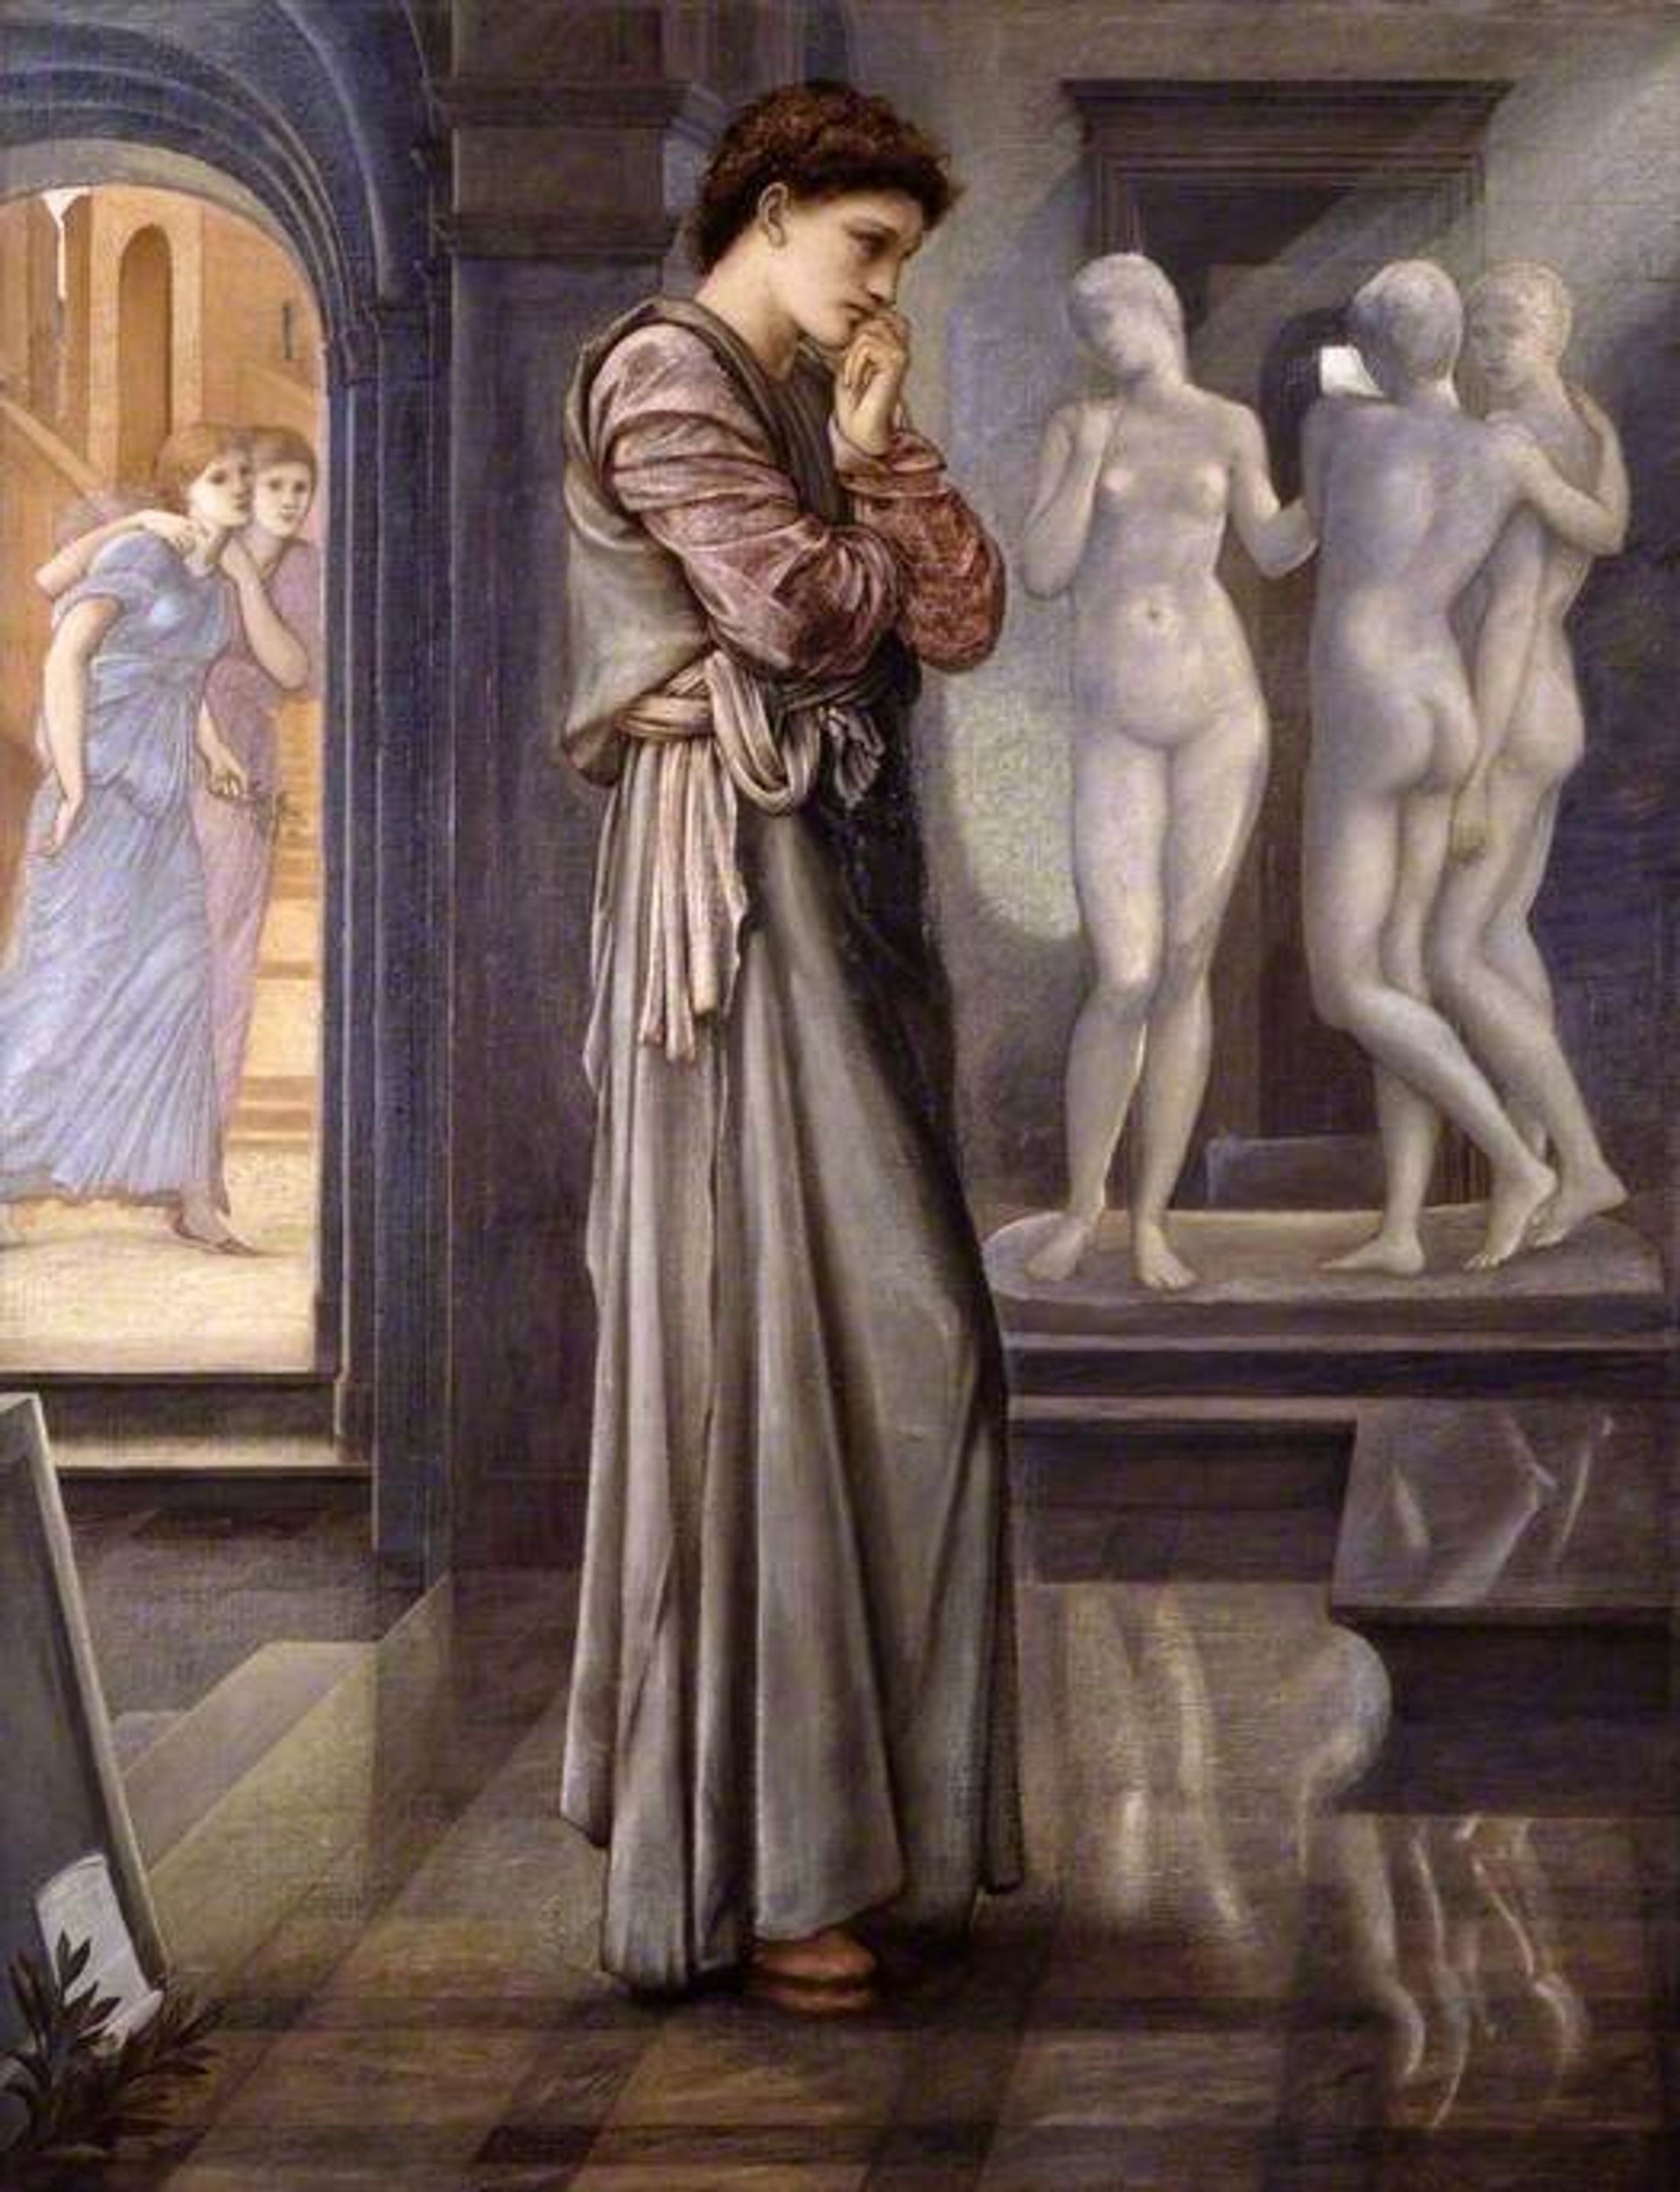 Edward Burne-Jones's Pygmalion and the Image: The Heart Desires (1878), one of many of the artist's works held by Birmingham Museums Trust © Birmingham Museums Trust